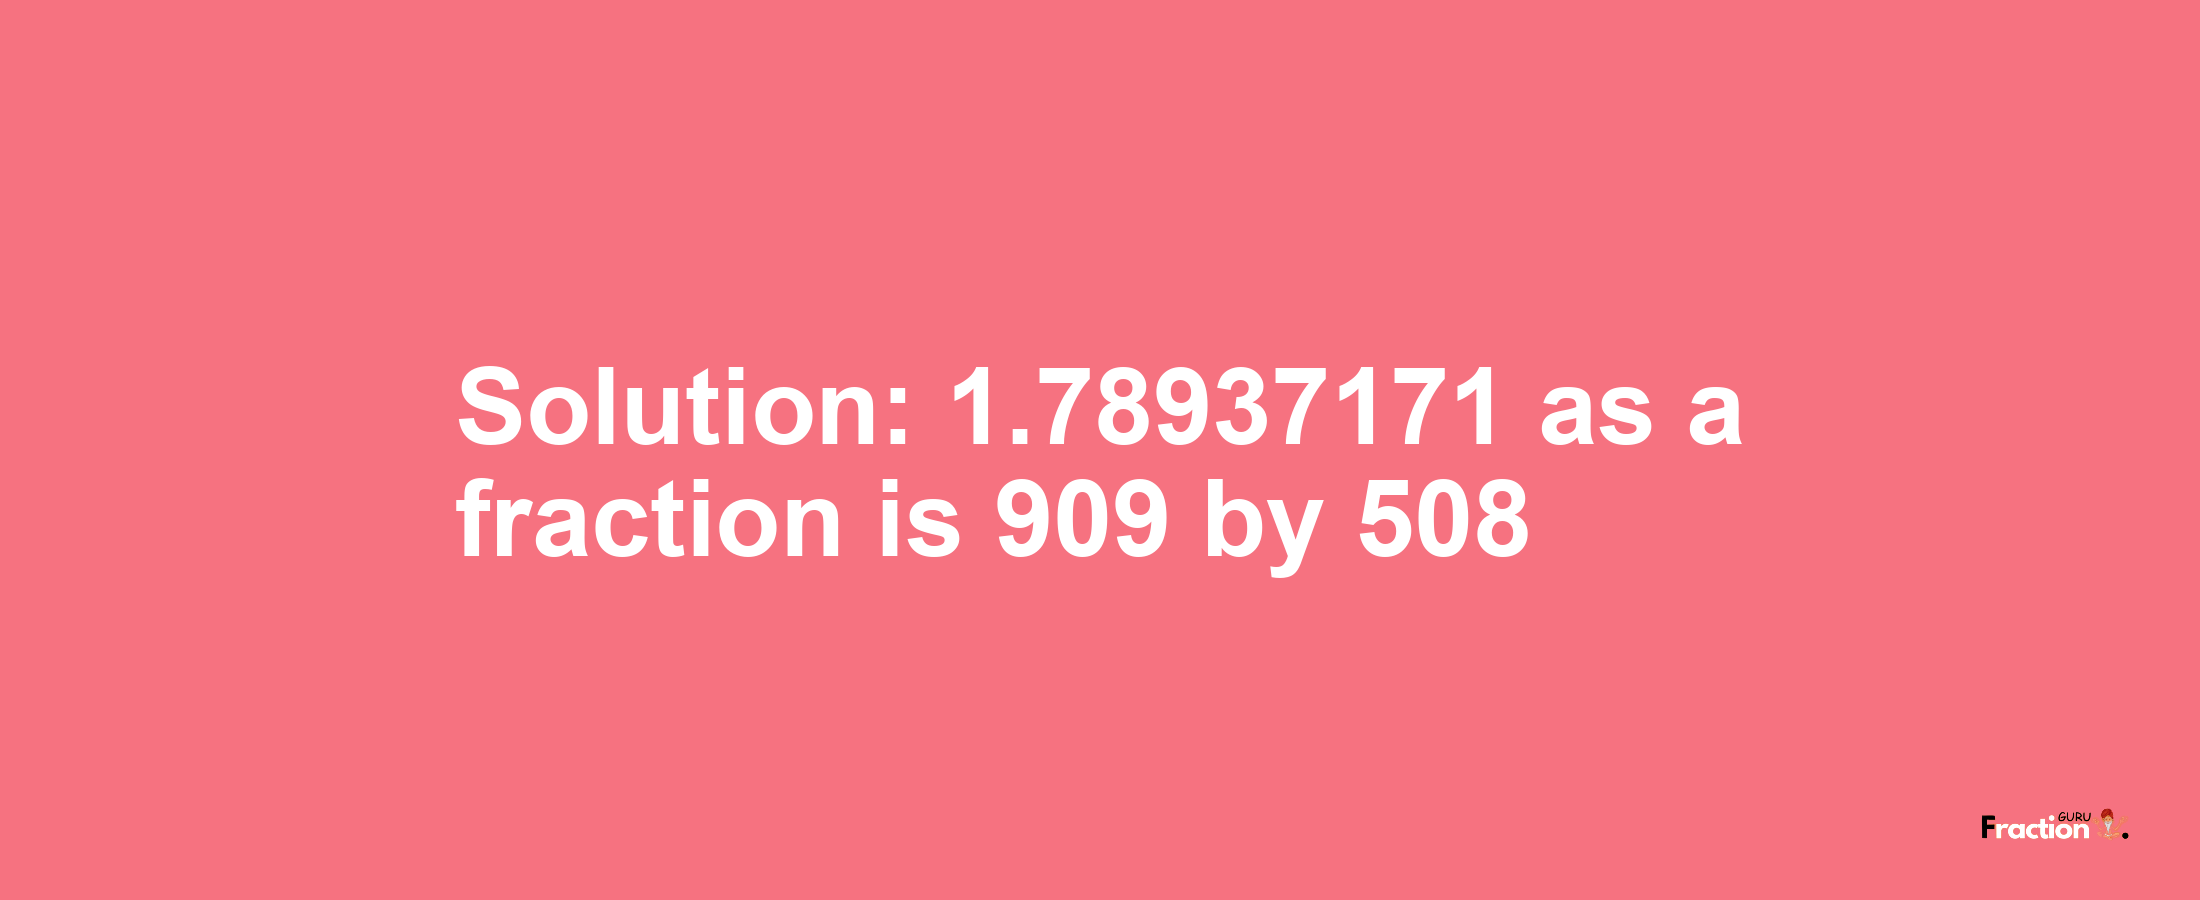 Solution:1.78937171 as a fraction is 909/508